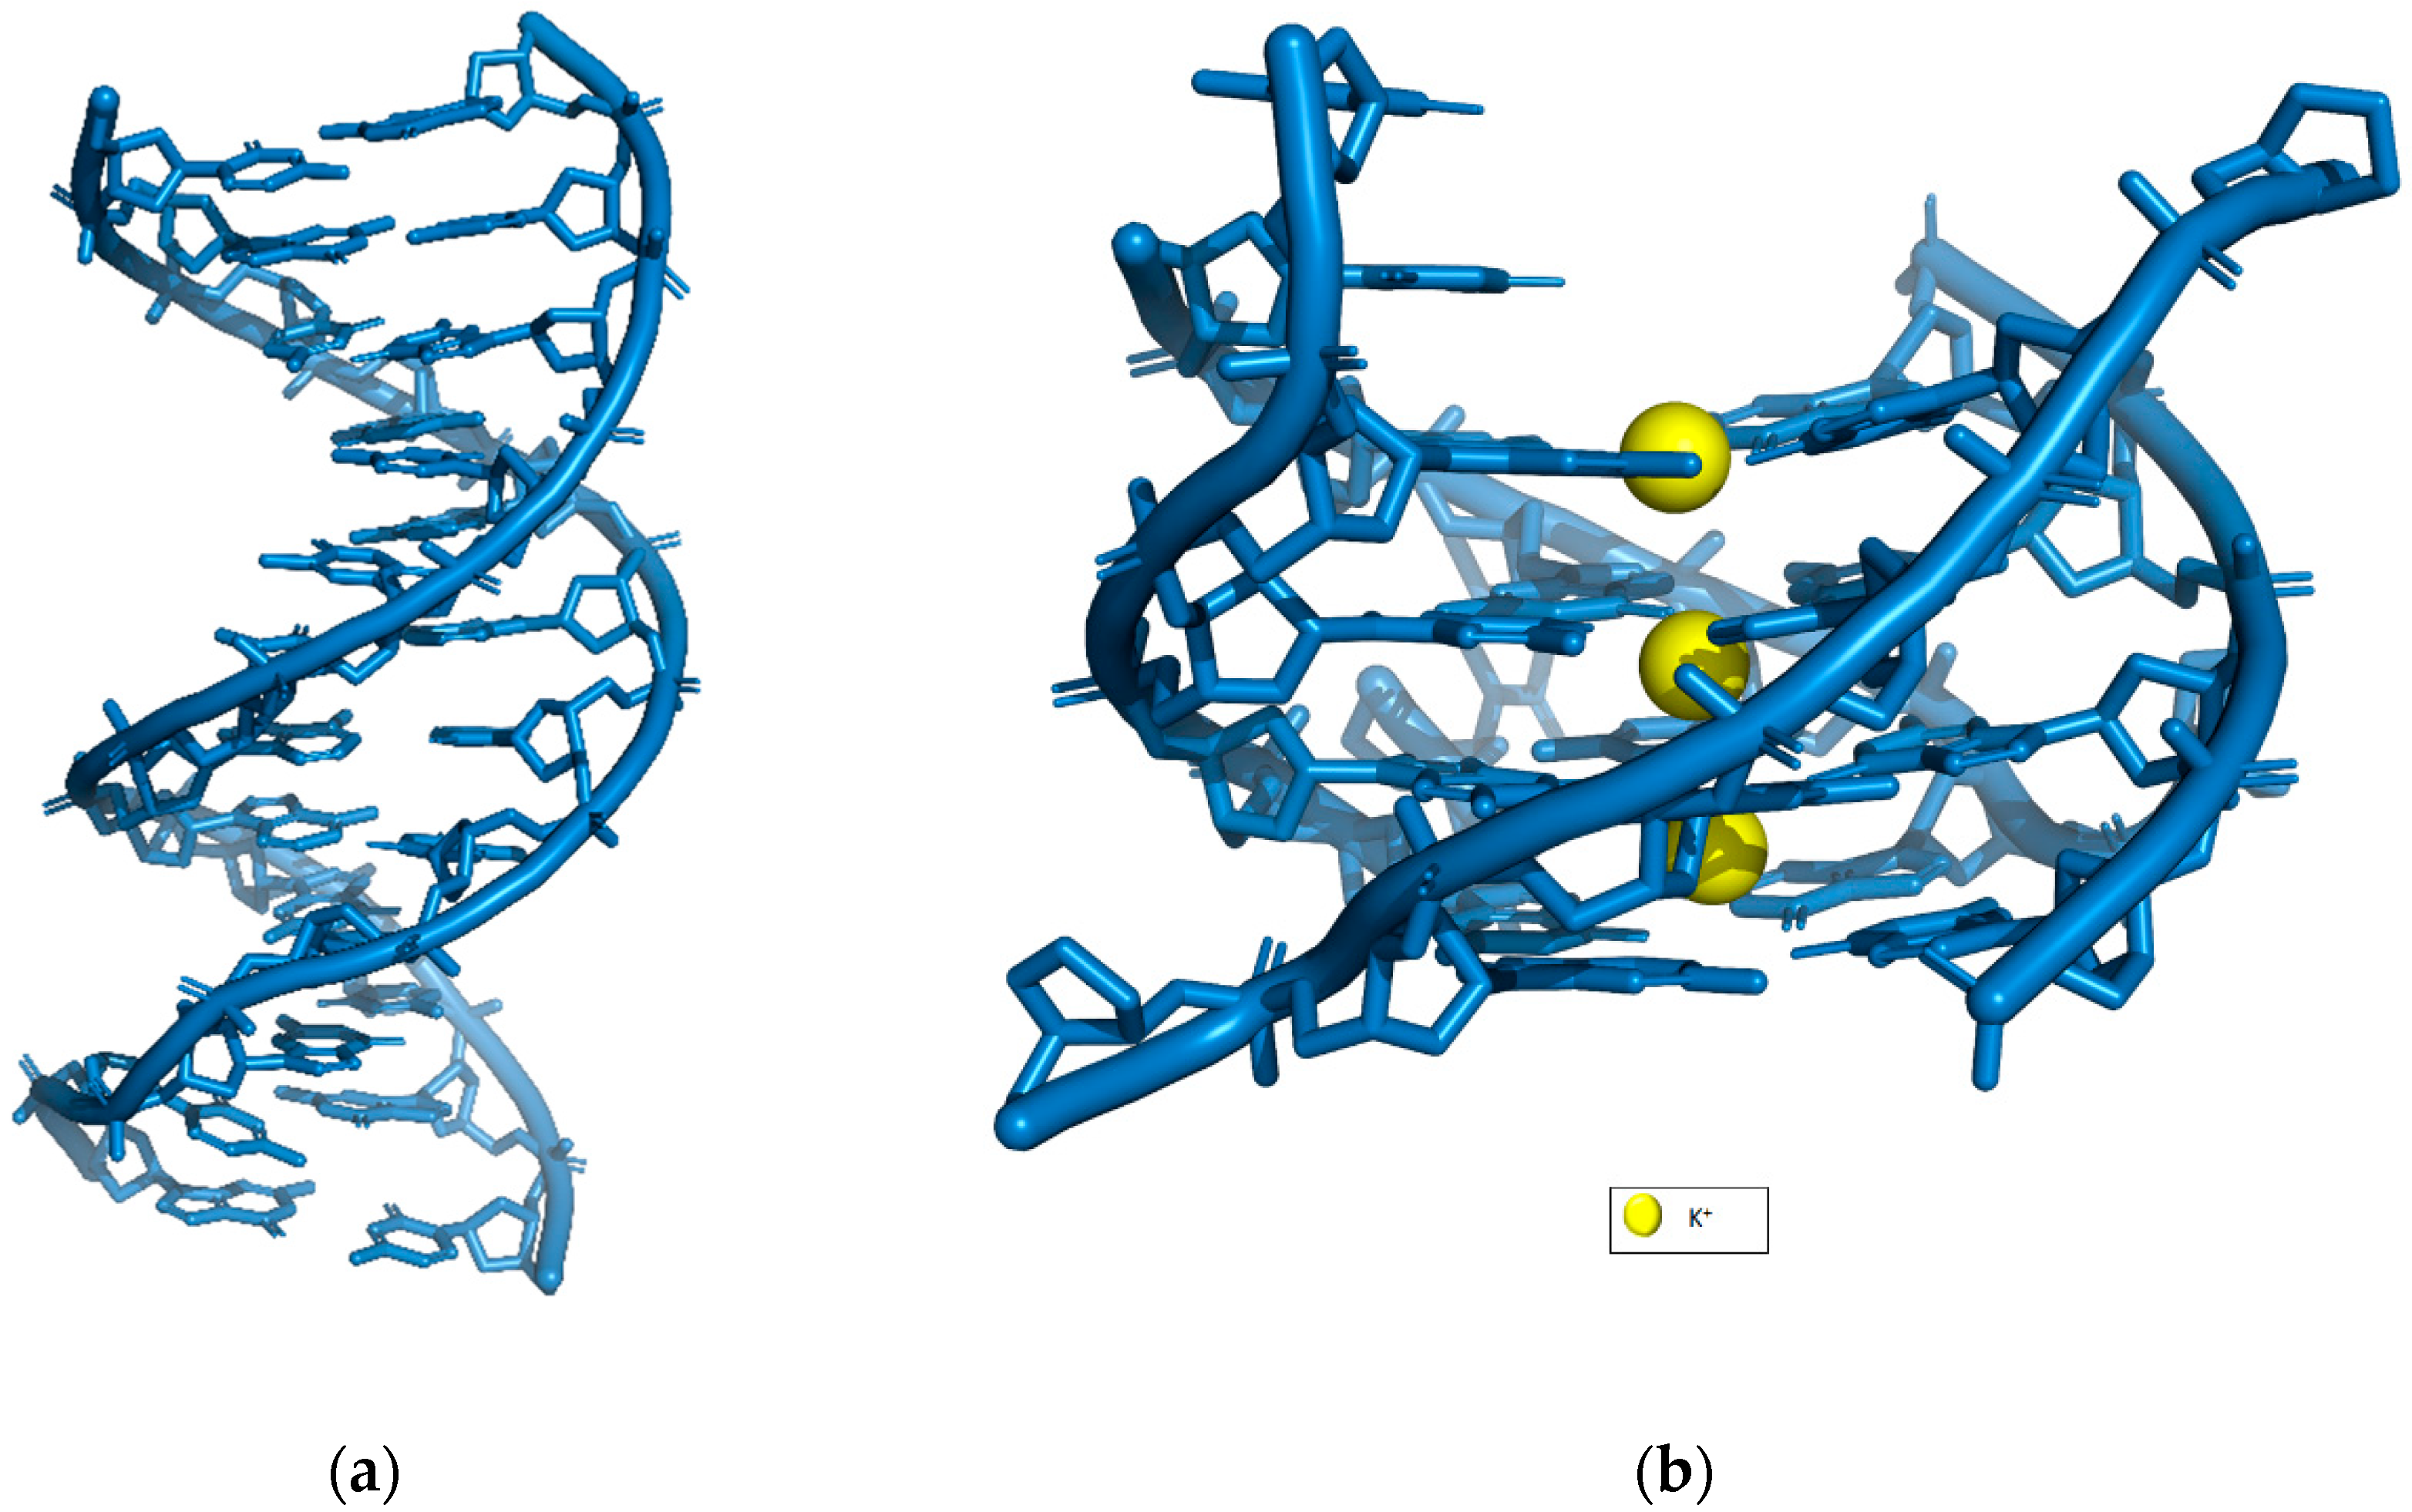 NMM and CV binding to GQ DNA. (A) Chemical structure of NMM and CV. (B)